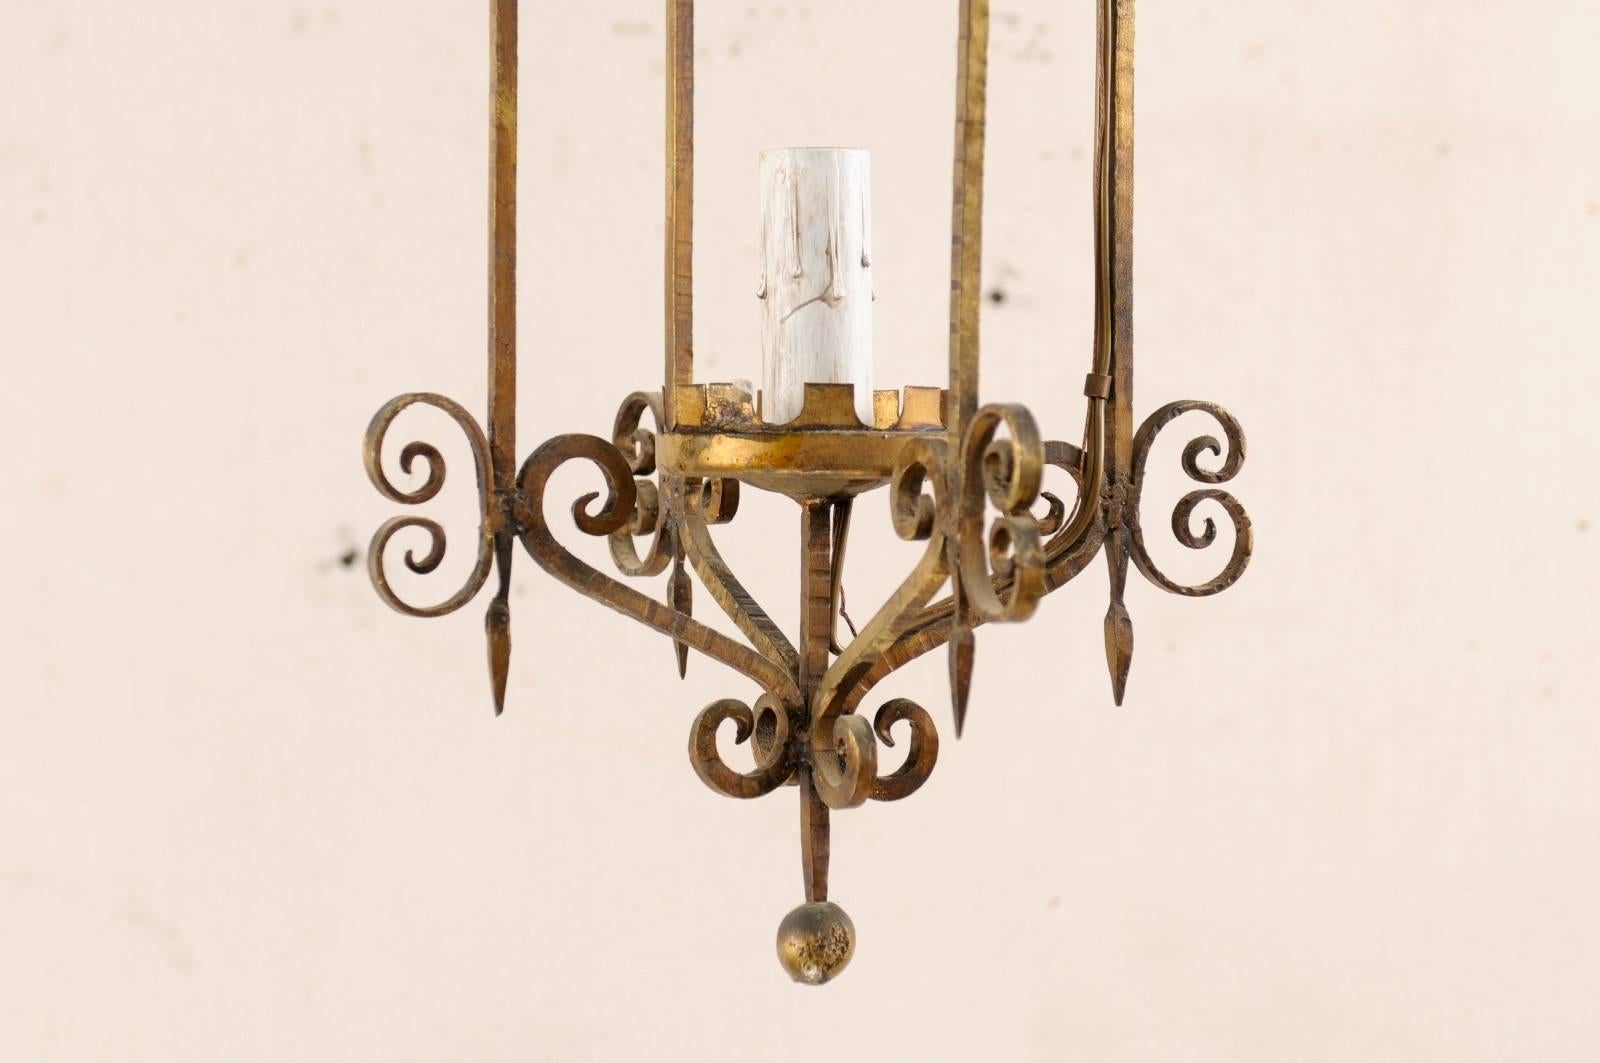 French Mid-20th Century Single Light Scrolled Iron Chandelier in Gold Bronze Hue For Sale 2